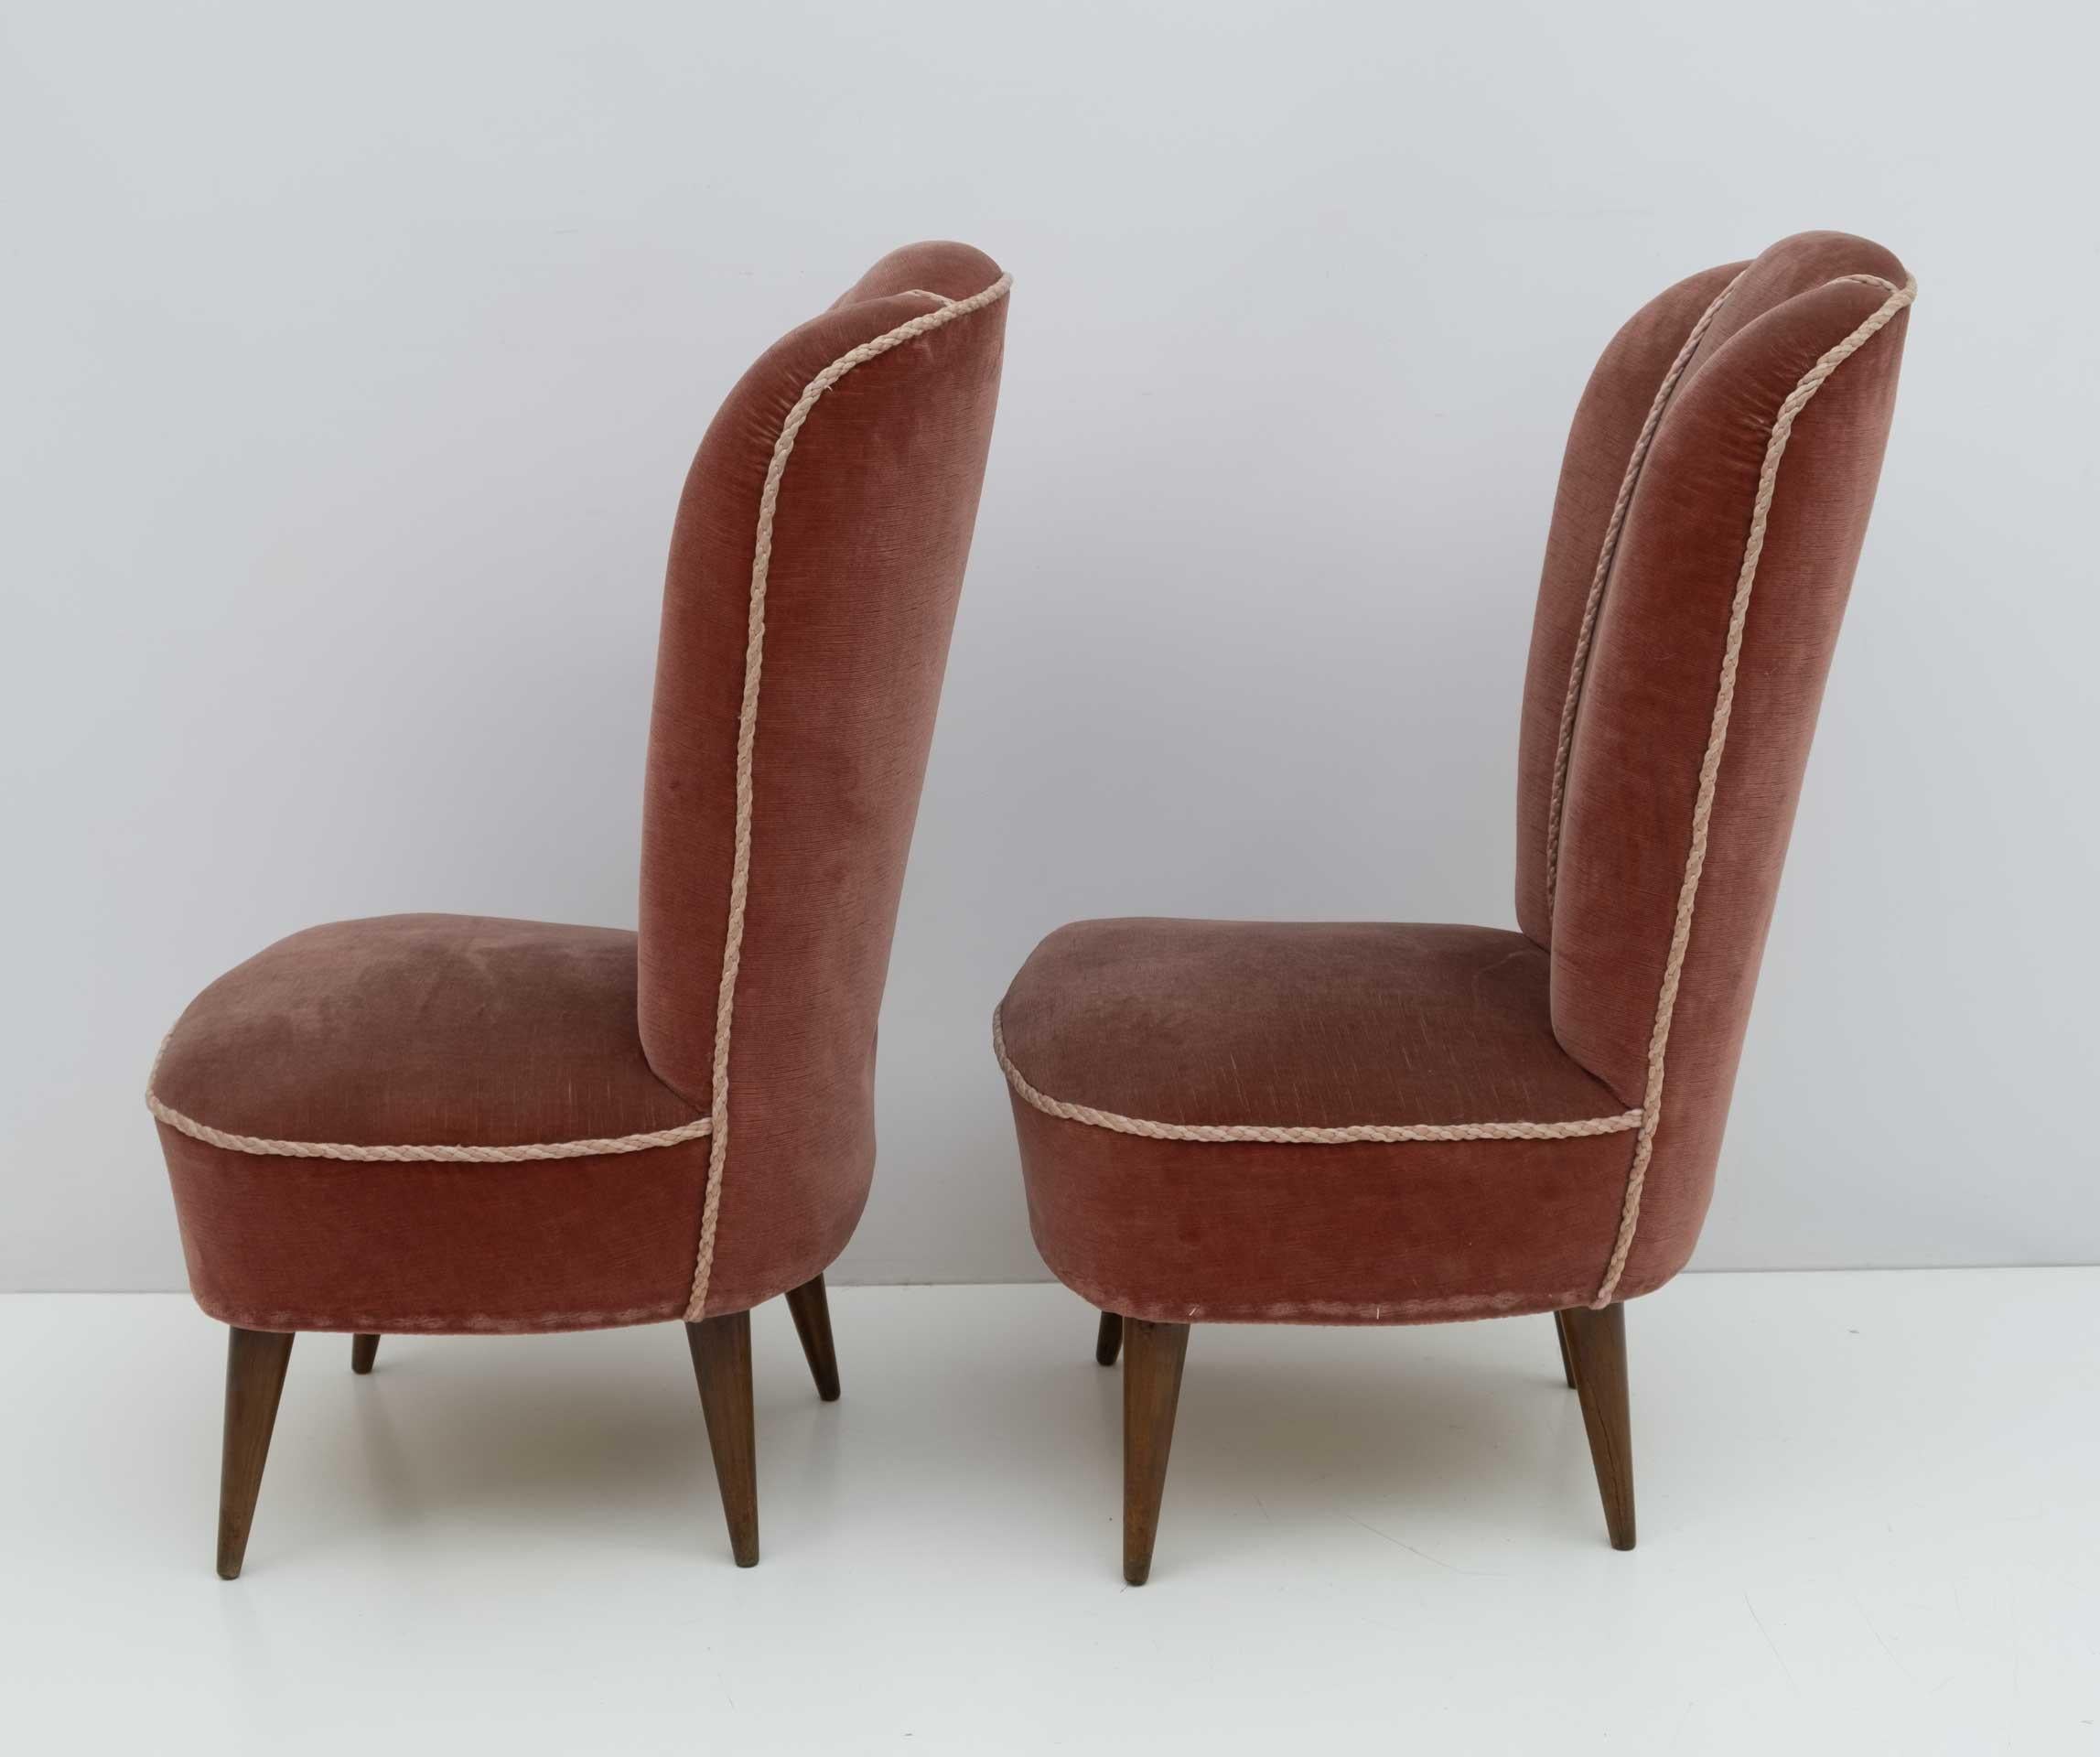 Attributed Gio Ponti Mid-Century Italian Small Armchairs by ISA Bergamo, Pair For Sale 2